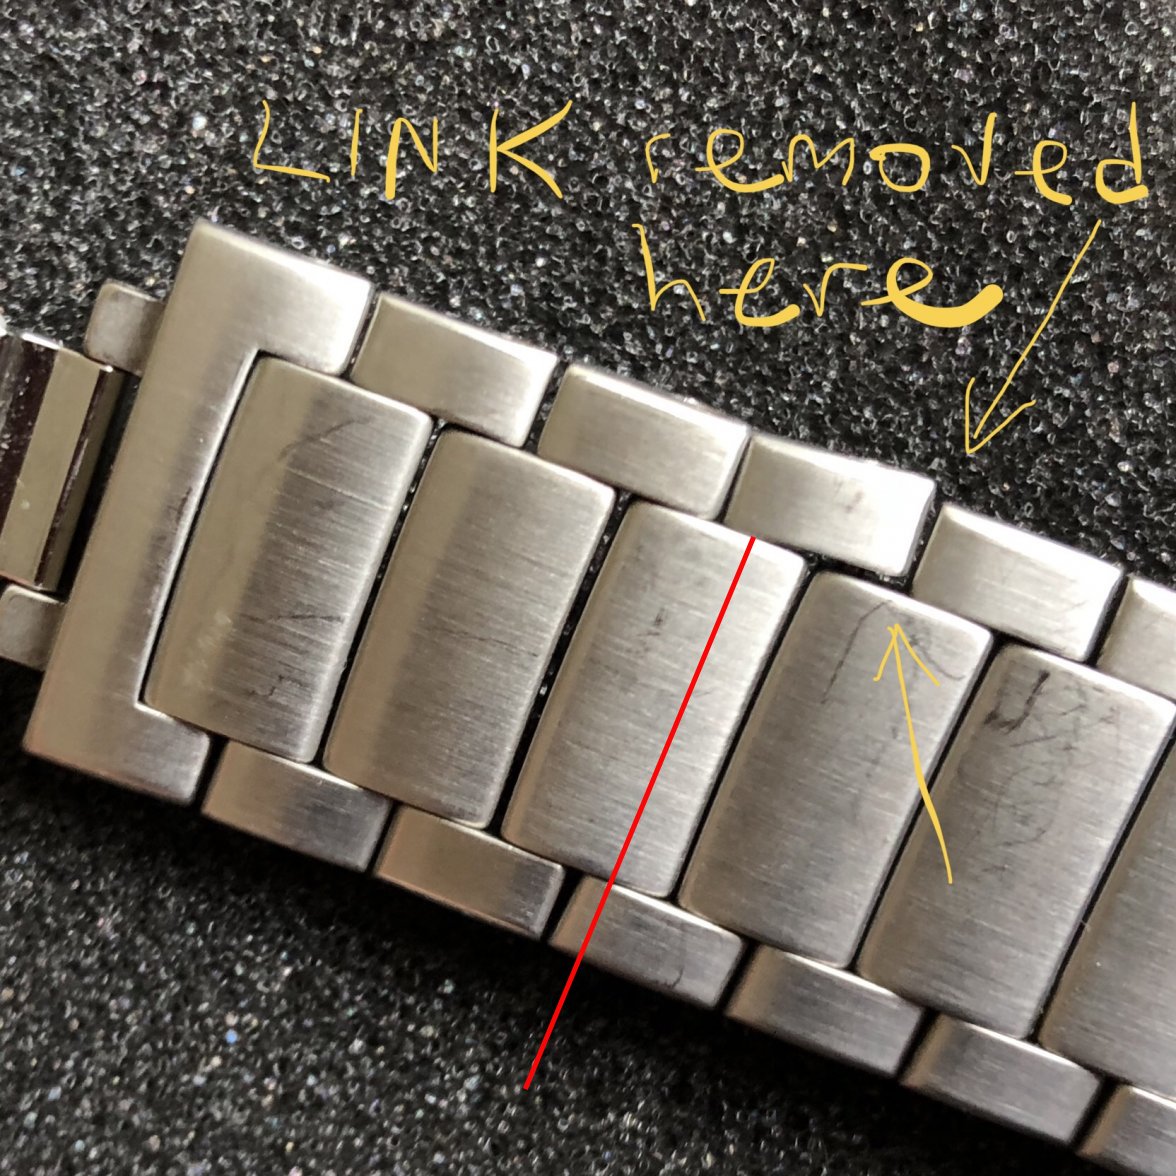 Watch Band Repair Link Removal Tool | Property Room